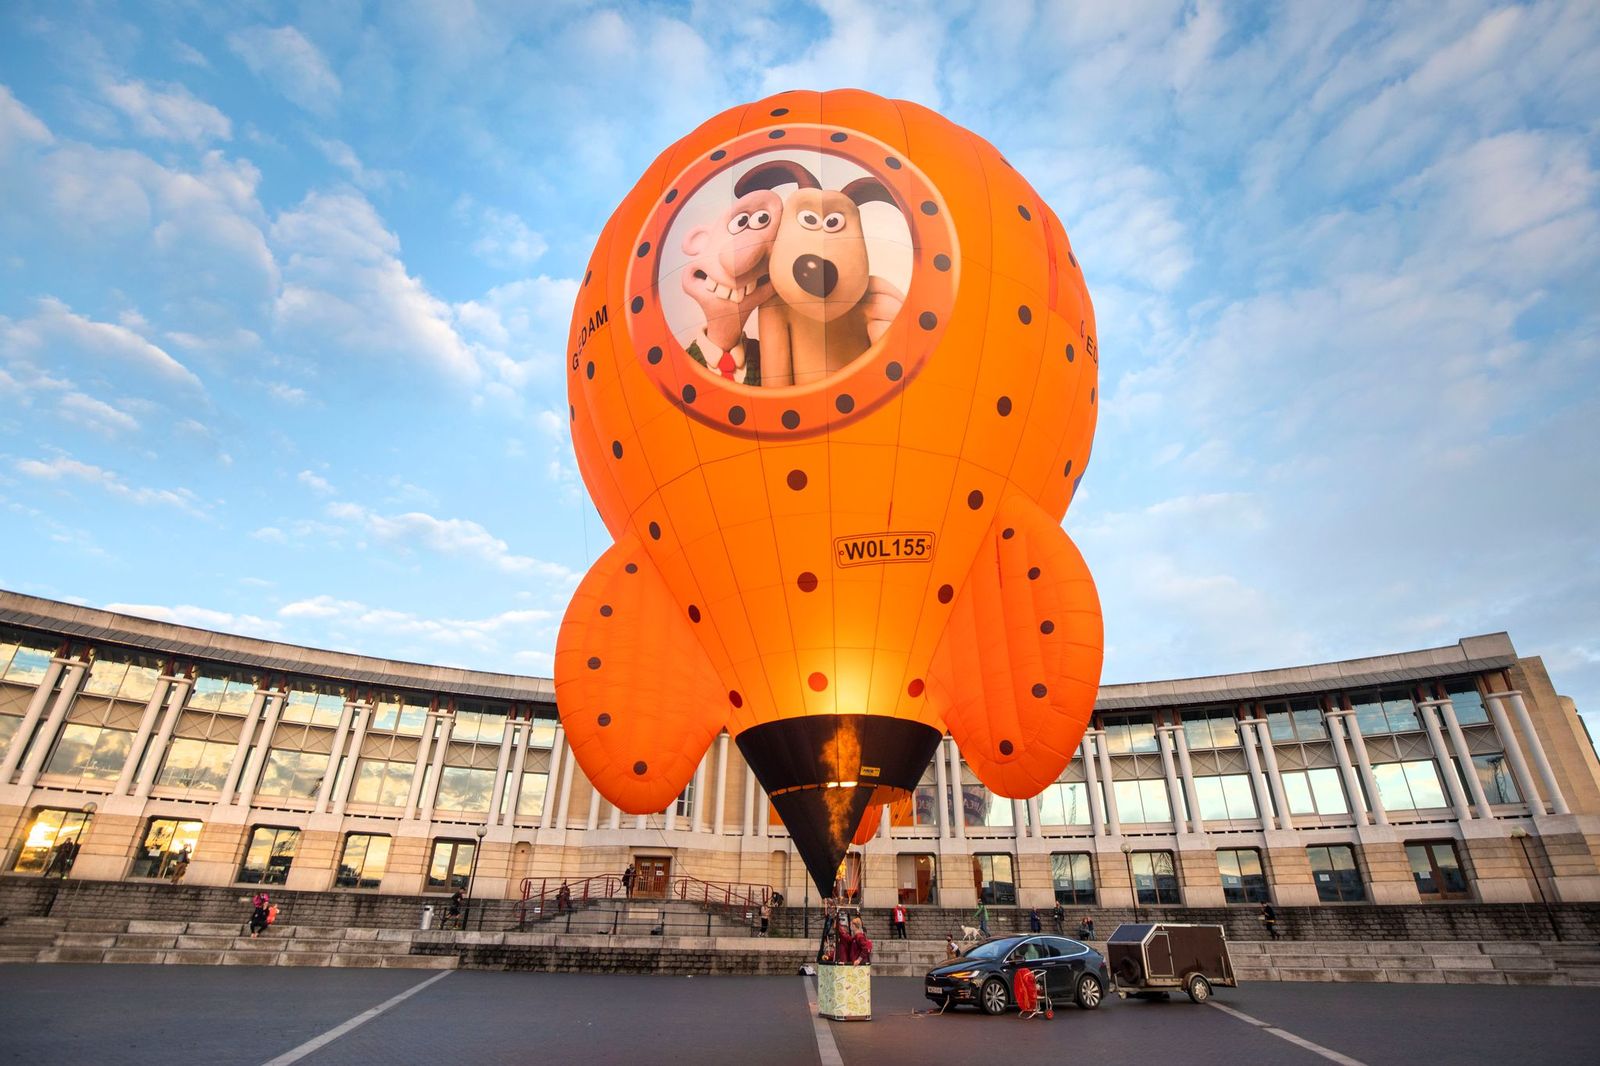 Hold tight, lad! Wallace & Gromit’s moon rocket lifts off for charity